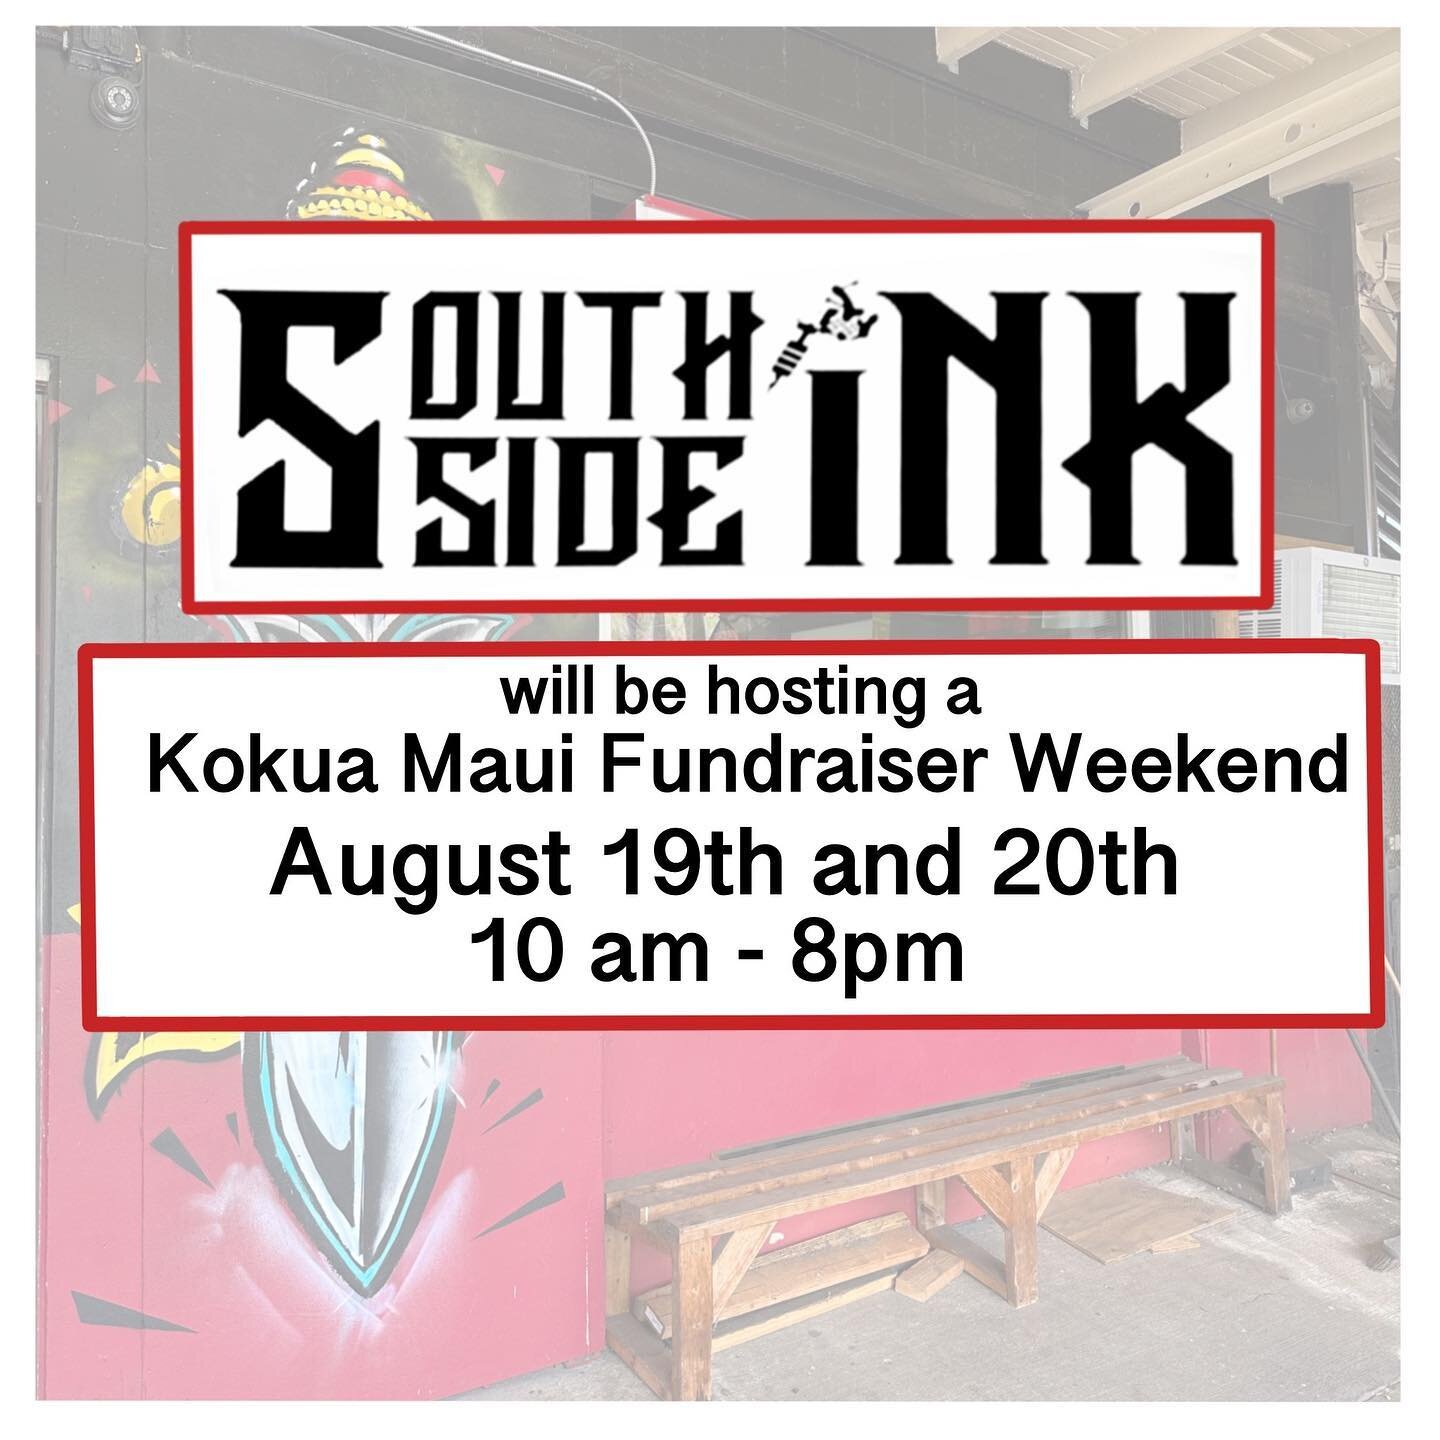 Aloha everyone!🌺

Southside Ink Tatau will be holding a Kokua Maui Fundraiser Weekend starting Saturday, August 19th - Sunday, August 20th. A few of our artists will be having flash designs and tattoo specials. We will also be selling hotdogs and re